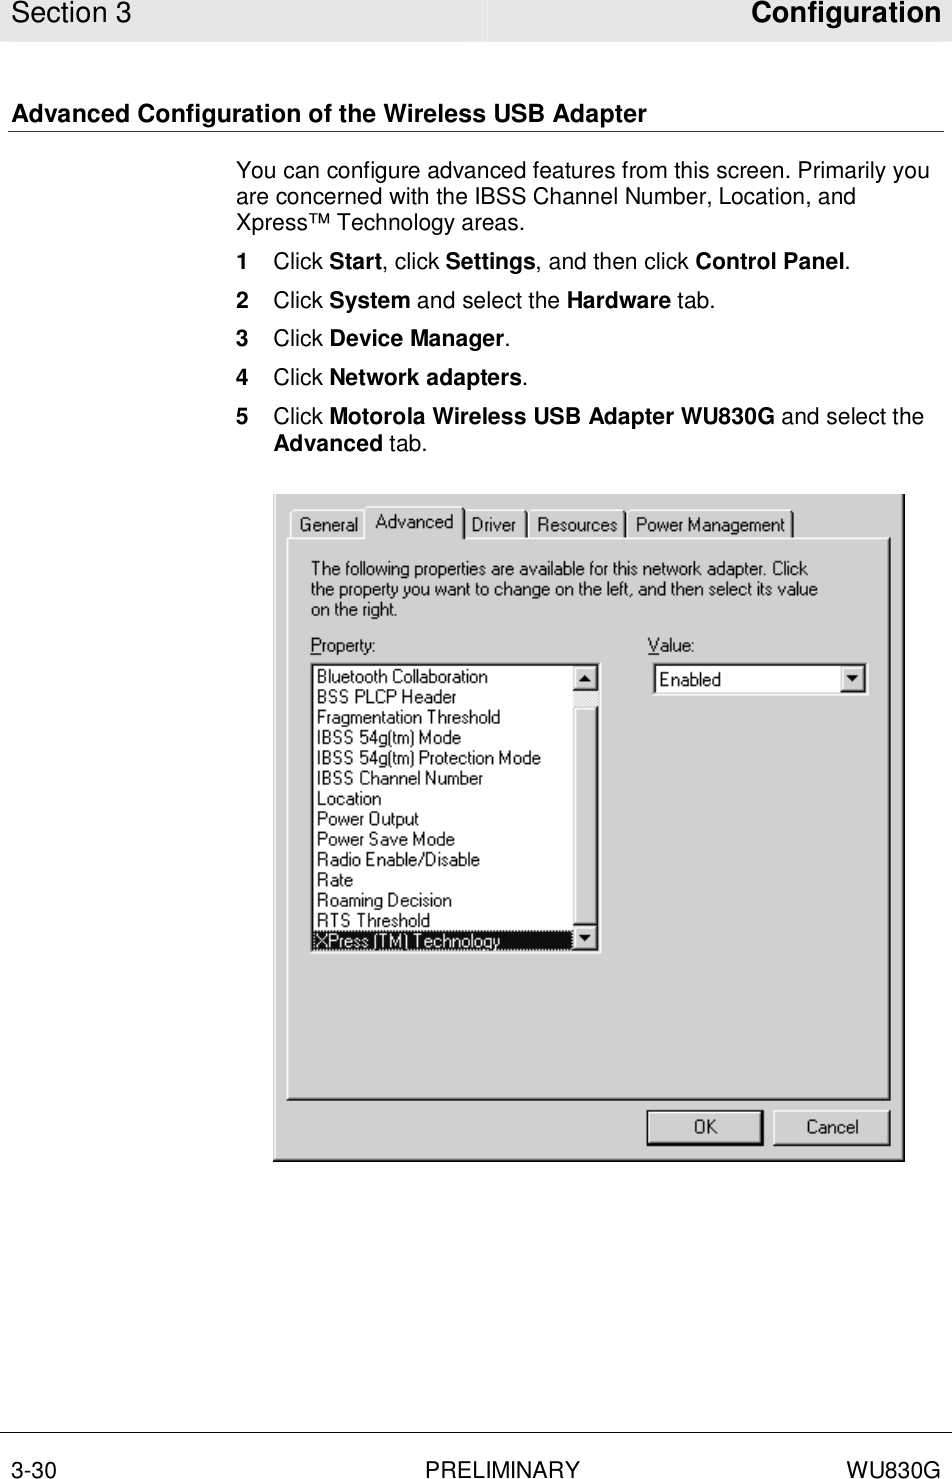 Section 3  Configuration  3-30 PRELIMINARY WU830G  Advanced Configuration of the Wireless USB Adapter You can configure advanced features from this screen. Primarily you are concerned with the IBSS Channel Number, Location, and Xpress™ Technology areas. 1  Click Start, click Settings, and then click Control Panel.  2  Click System and select the Hardware tab.  3  Click Device Manager.  4  Click Network adapters.  5  Click Motorola Wireless USB Adapter WU830G and select the Advanced tab.   